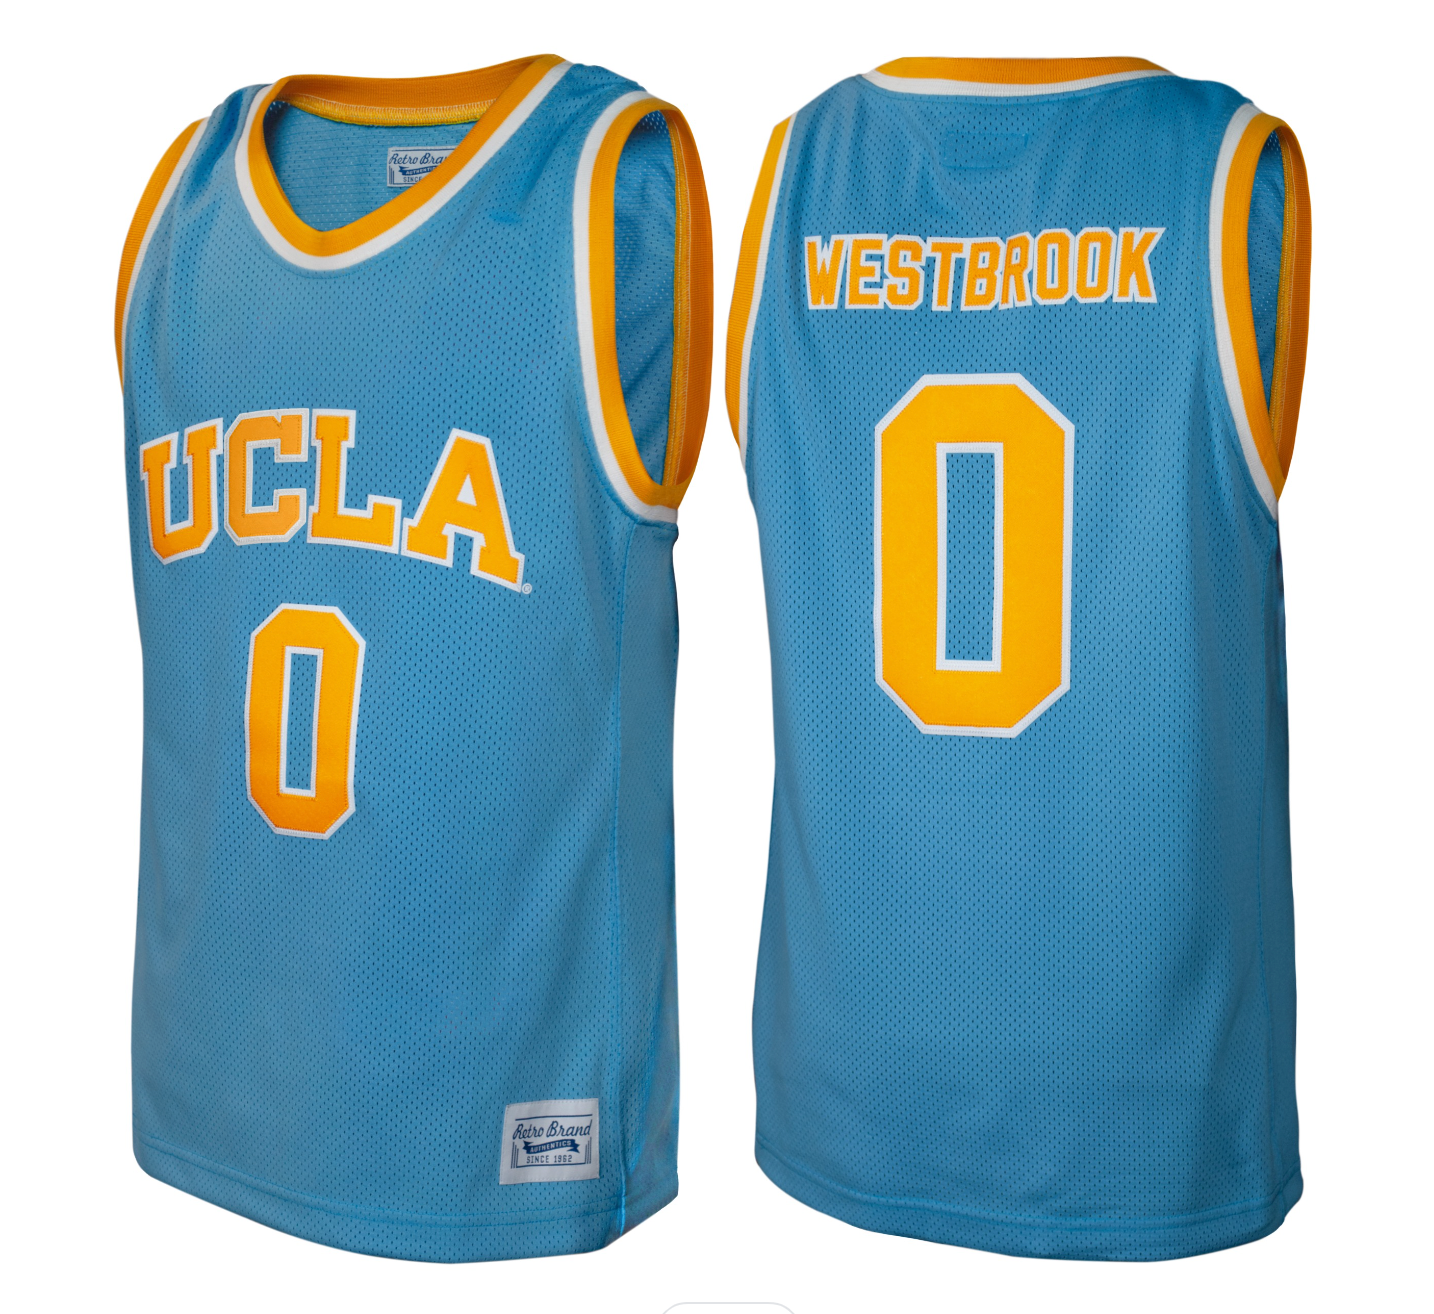 westbrook ucla jersey authentic, Off 79%